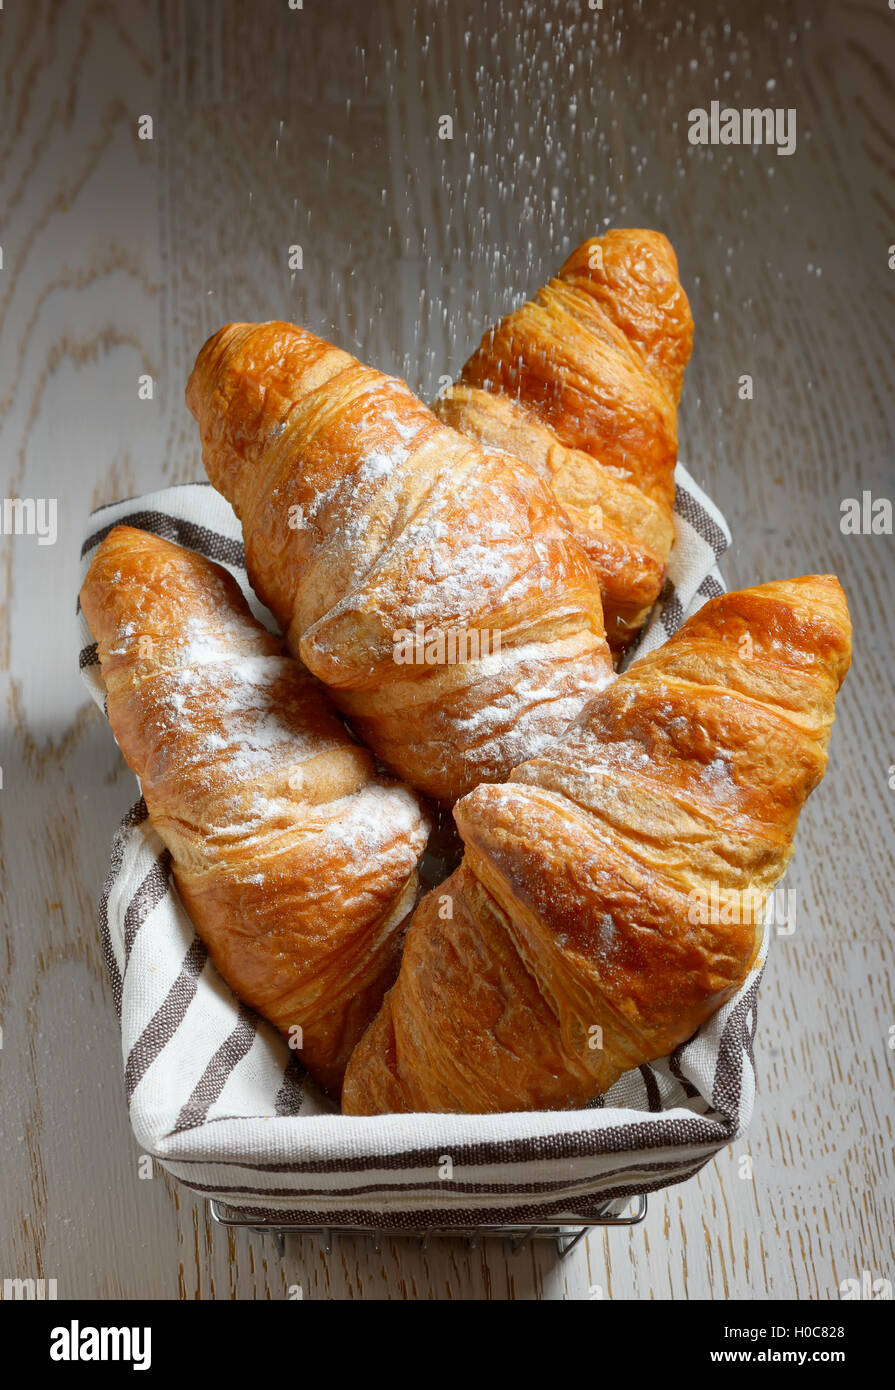 Tasty croissants in basket on wooden background Stock Photo